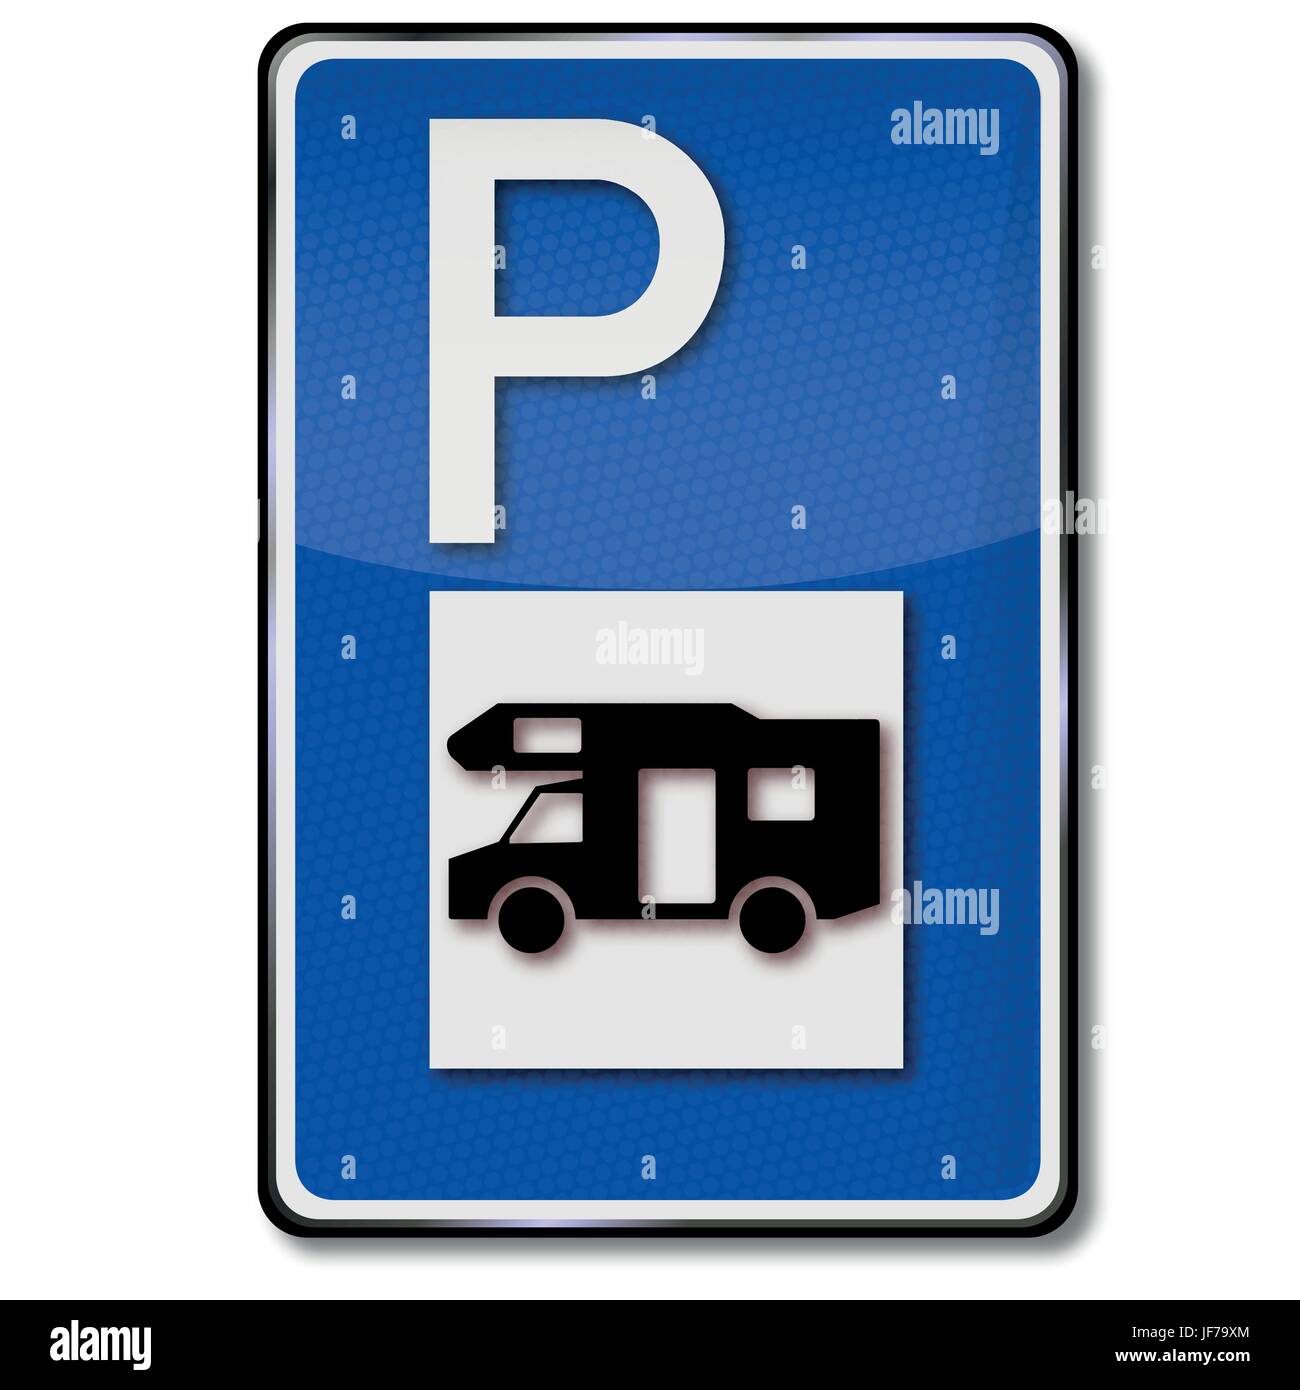 freedom, liberty, parking place, camping, parking, camper, danger, holiday, Stock Vector